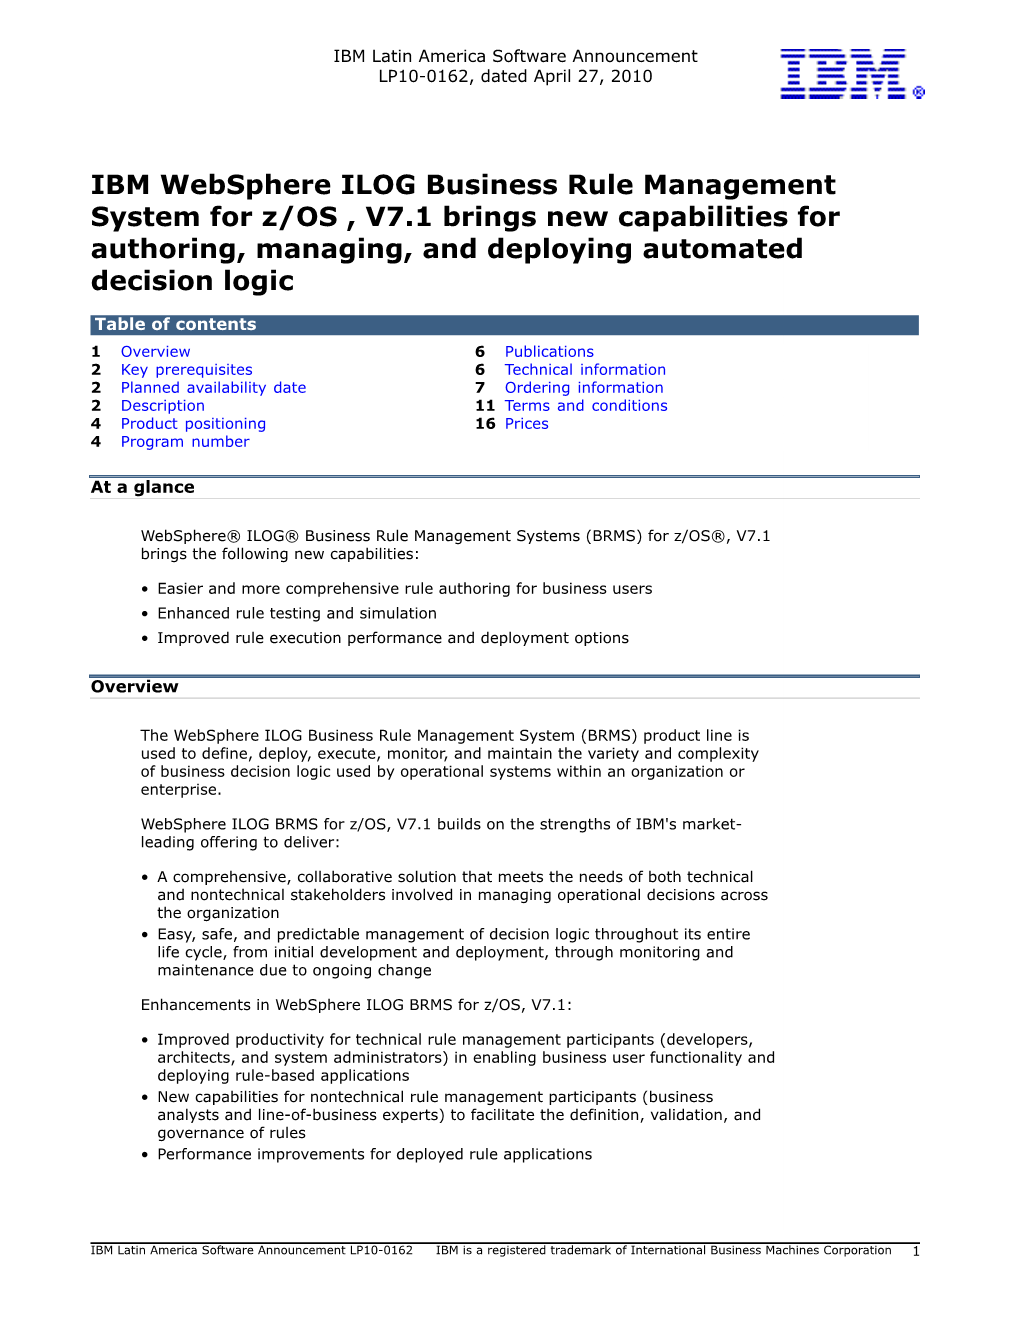 IBM Websphere ILOG Business Rule Management System for Z/OS , V7.1 Brings New Capabilities for Authoring, Managing, and Deploying Automated Decision Logic